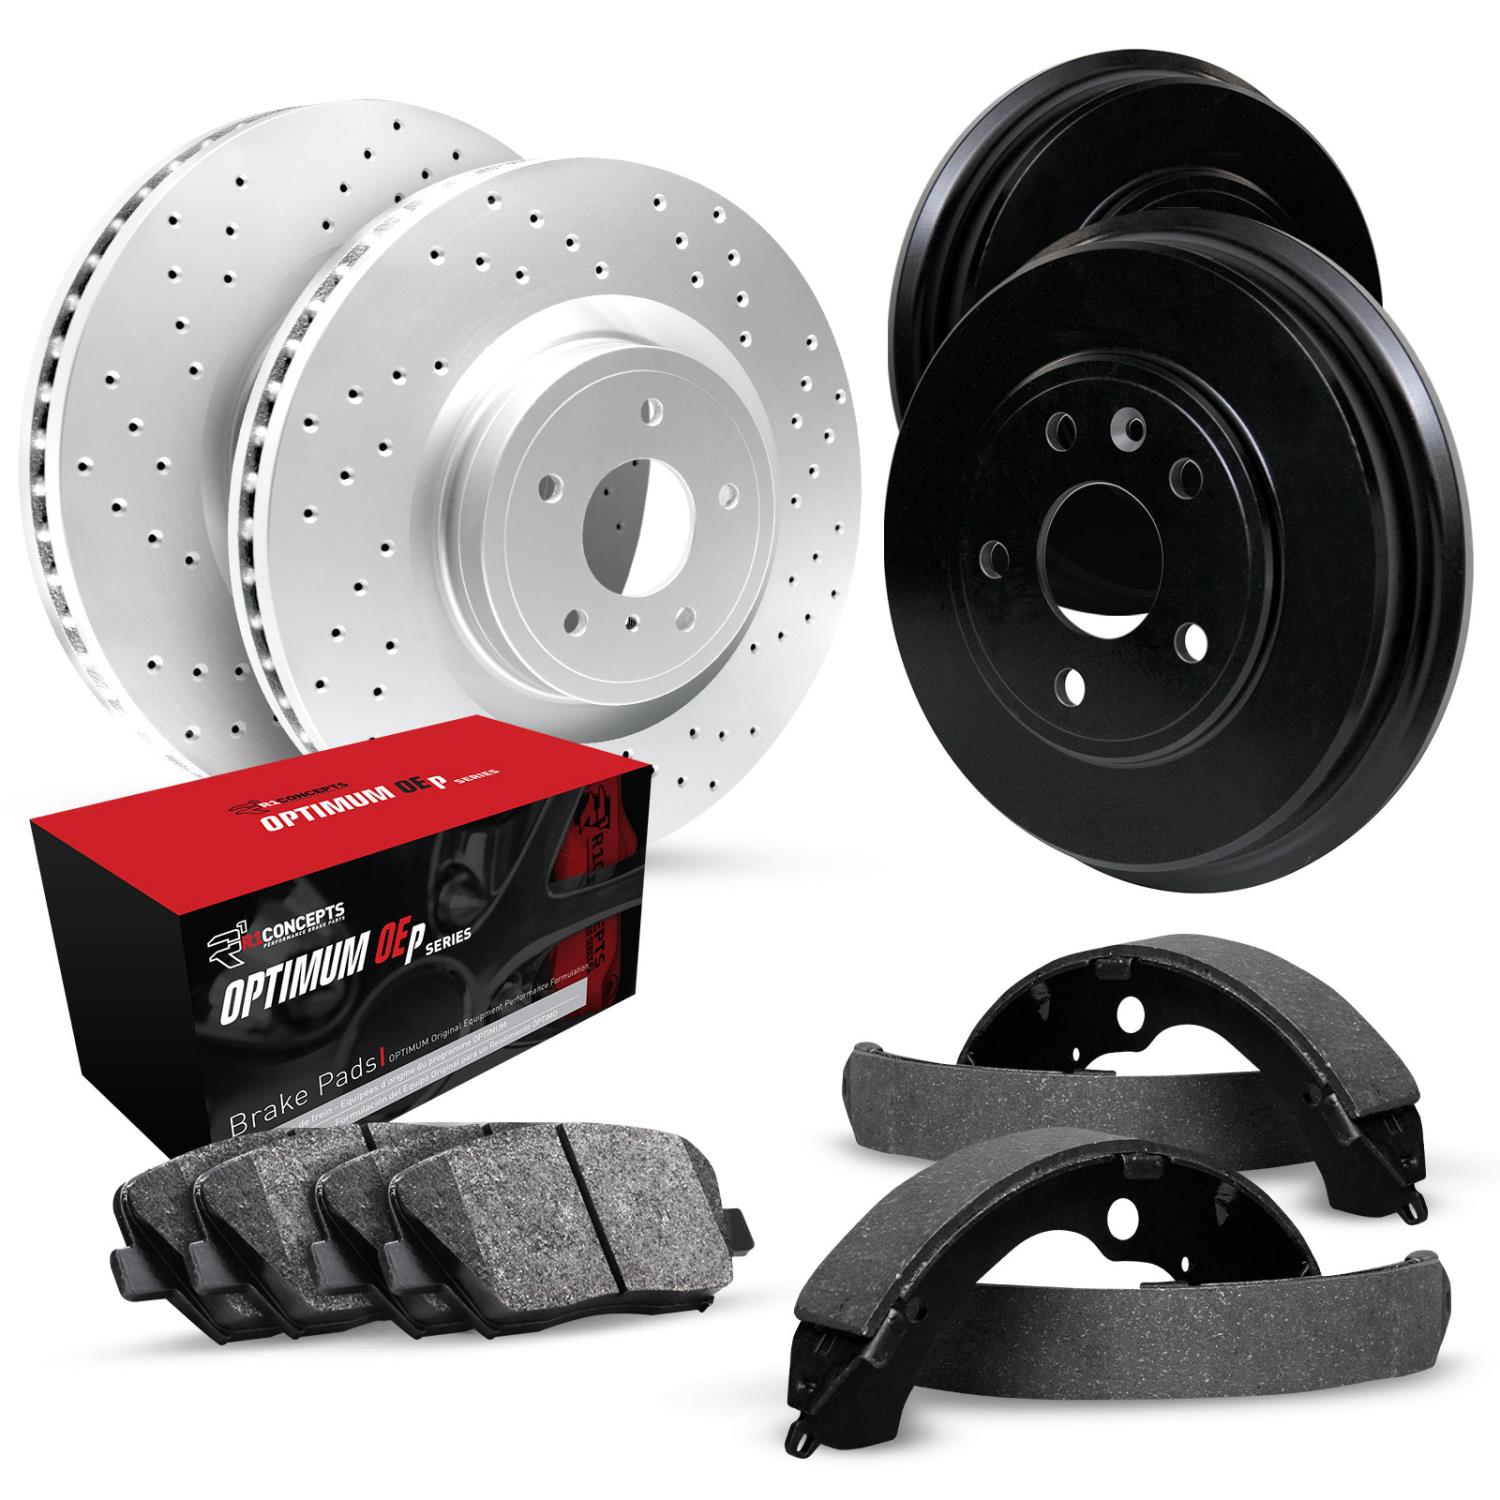 GEO-Carbon Drilled Brake Rotor & Drum Set w/Optimum OE Pads & Shoes, 1971-1972 GM, Position: Front & Rear